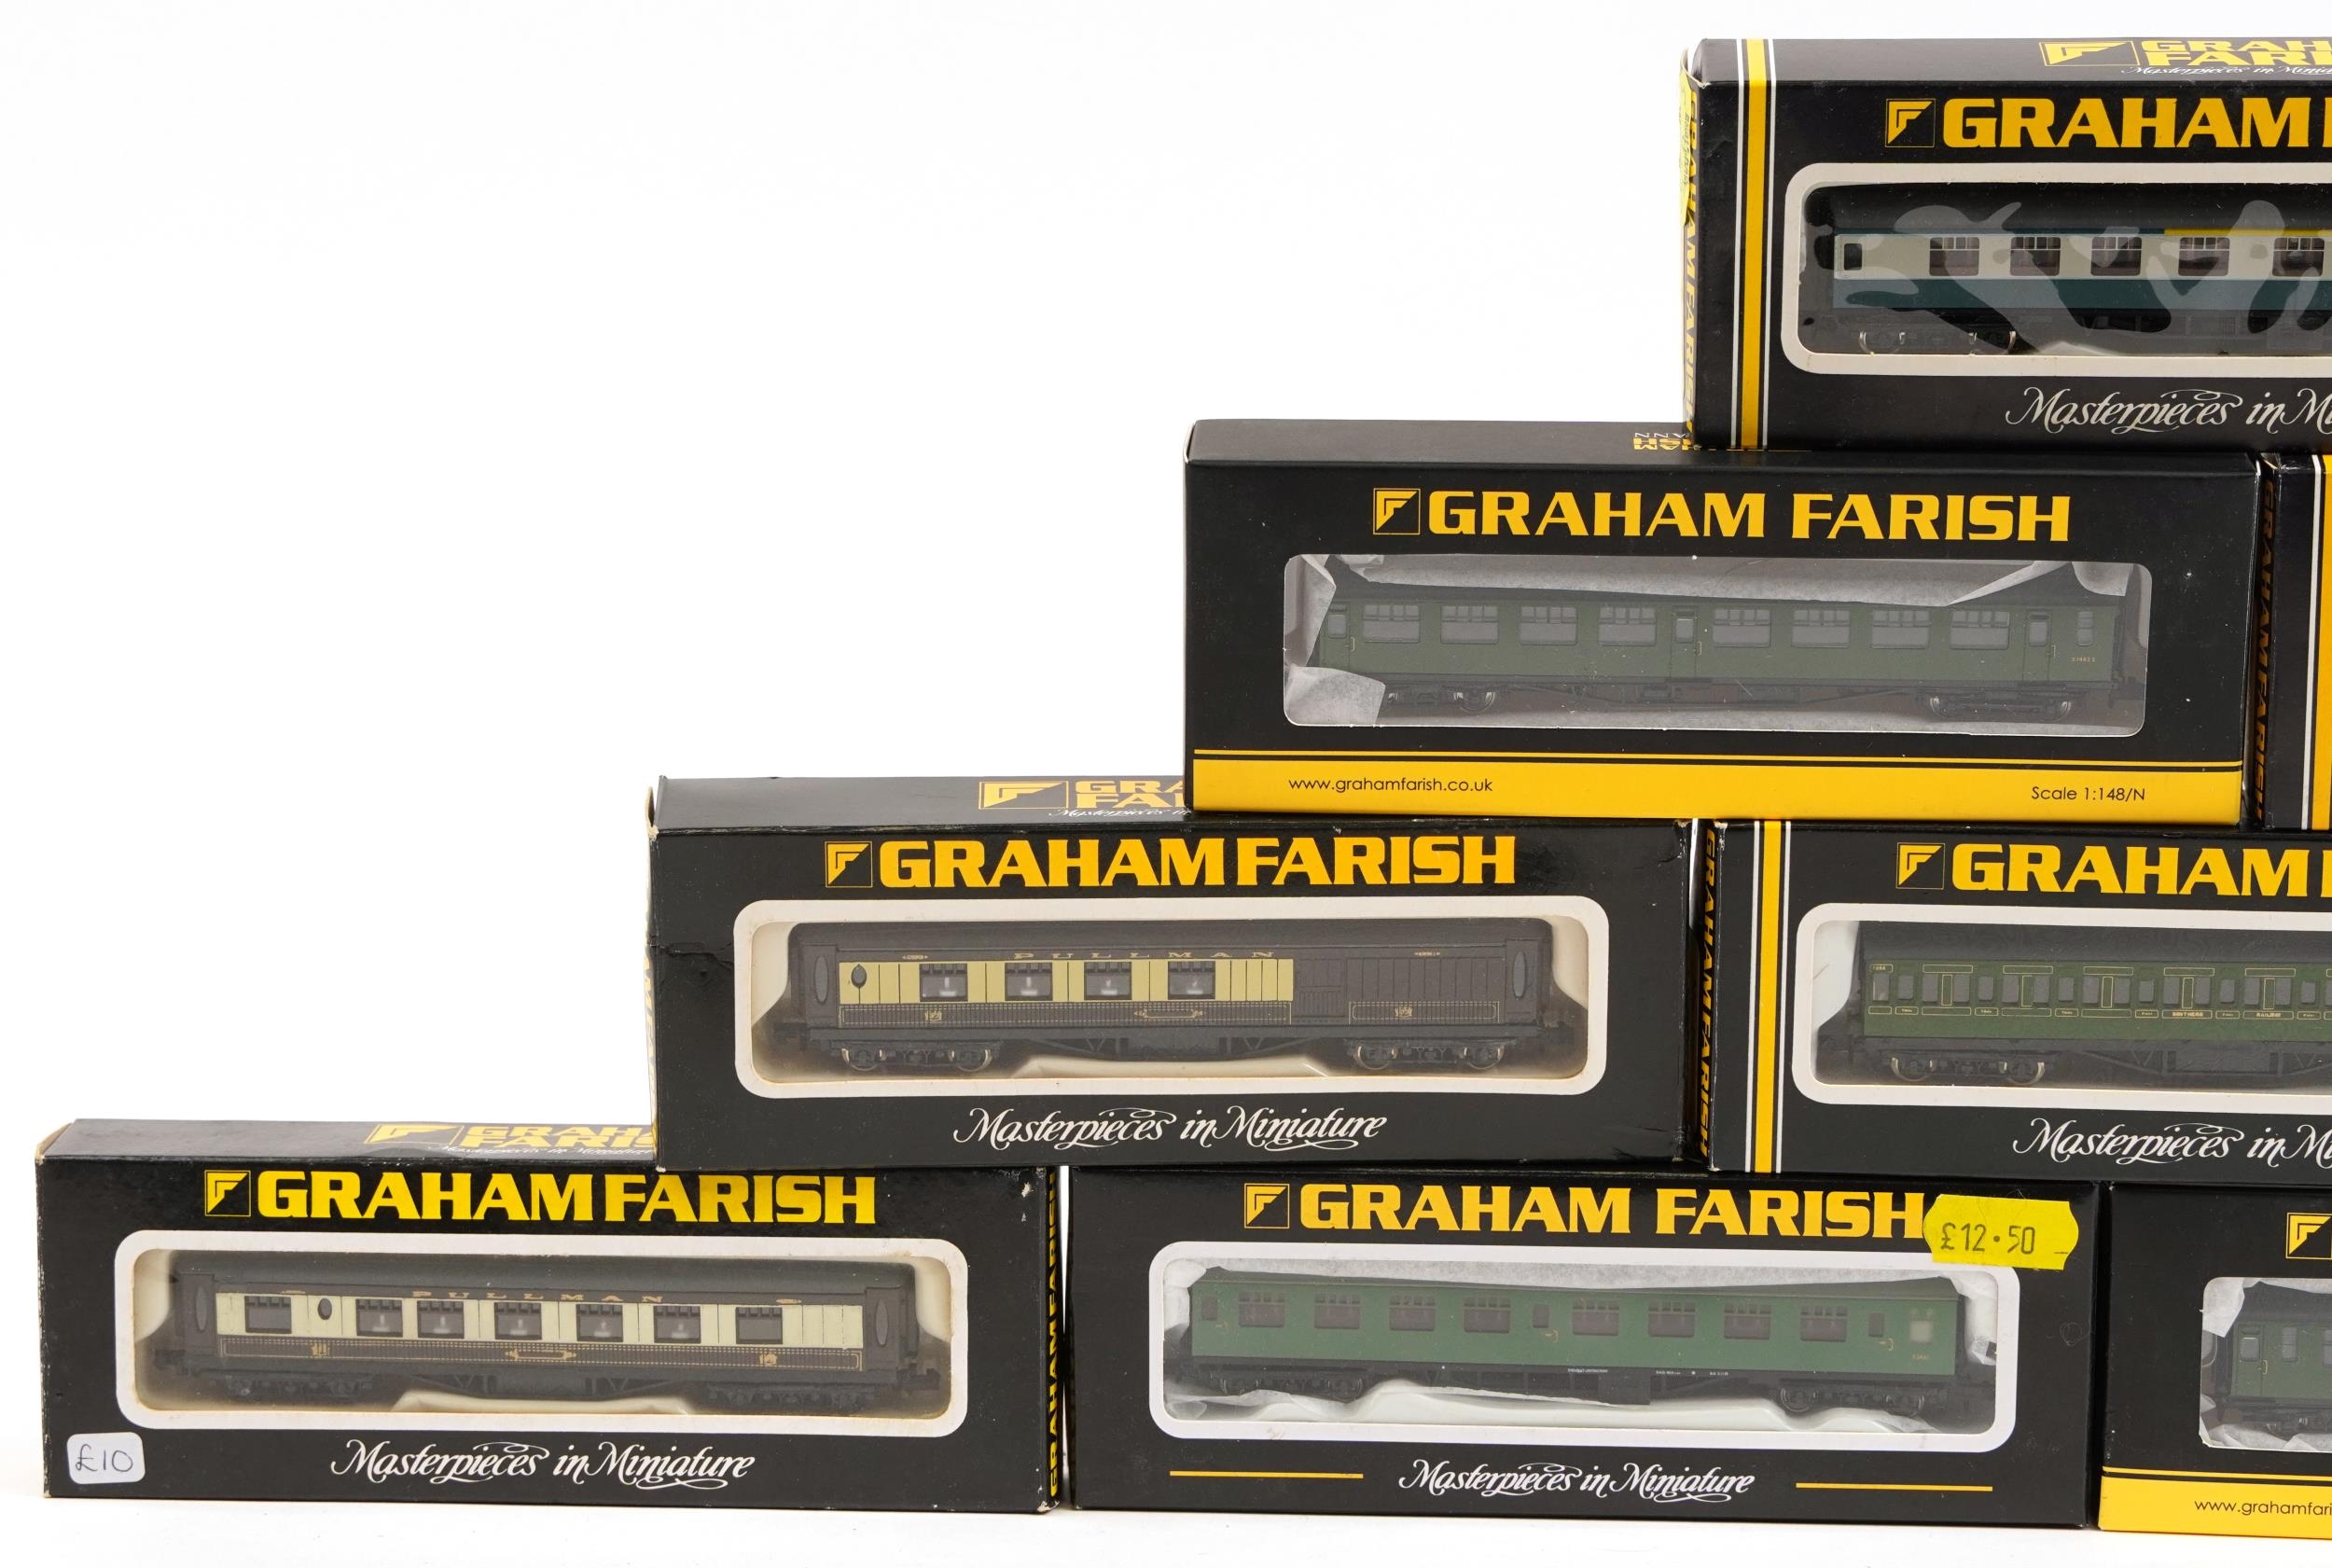 Ten Graham Farish N gauge model railway carriages with boxes, numbers 0603, 0615, 0623, 0646, - Image 2 of 5